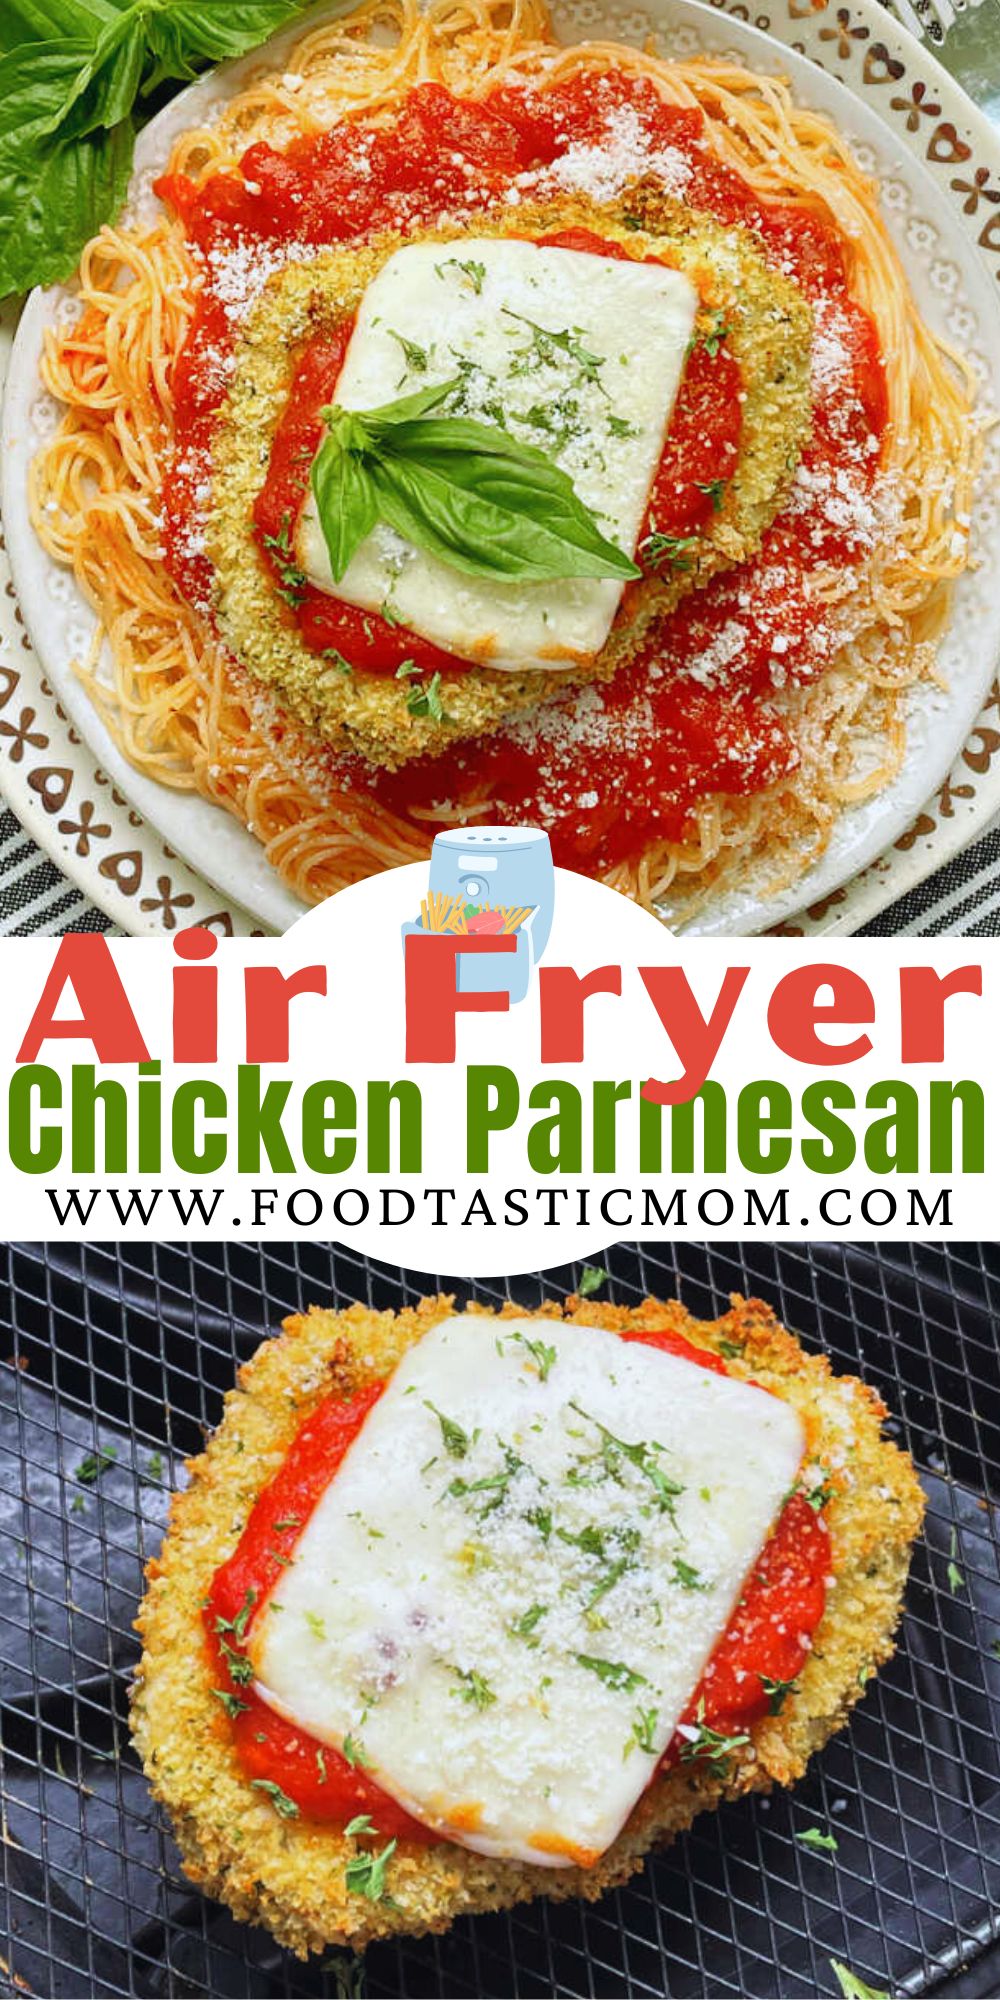 Make Chicken Parm better than a restaurant thanks to this recipe for Air Fryer Chicken Parmesan. So delish, healthy and ready in a flash! via @foodtasticmom